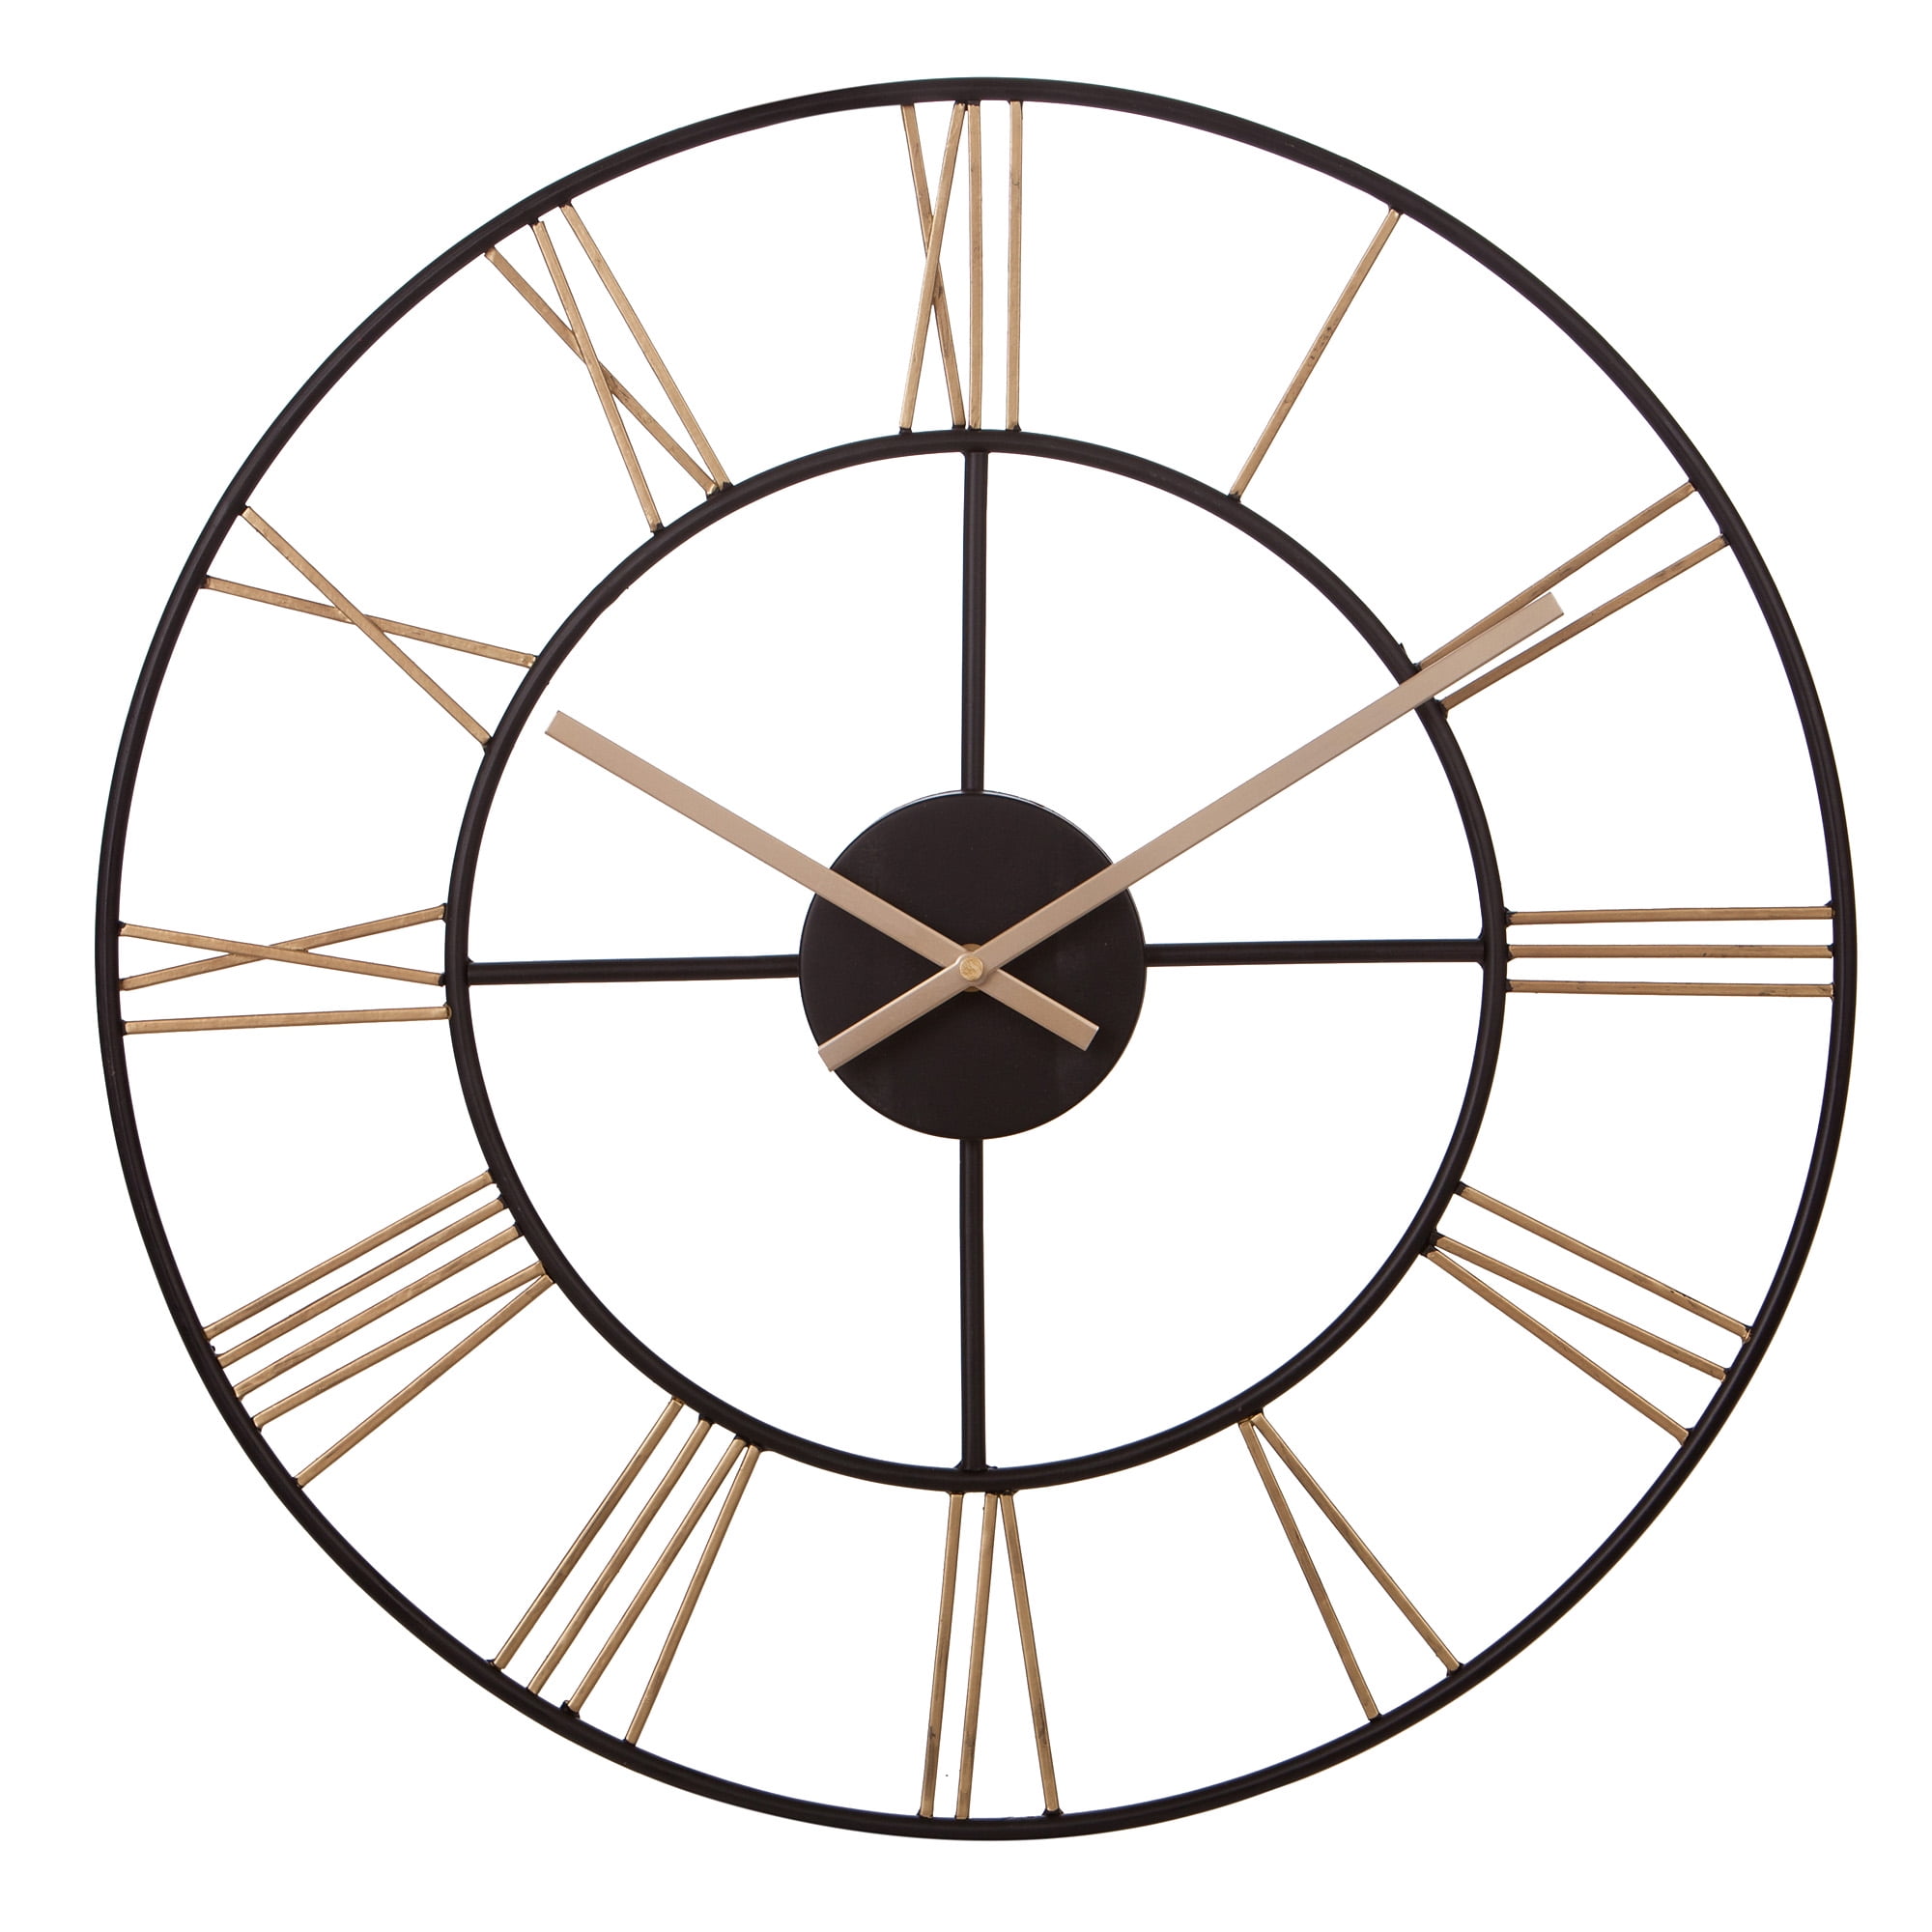 MISSOURI Established in 1821 COMPASS CLOCK Large 10.5 inch Wall Clock 